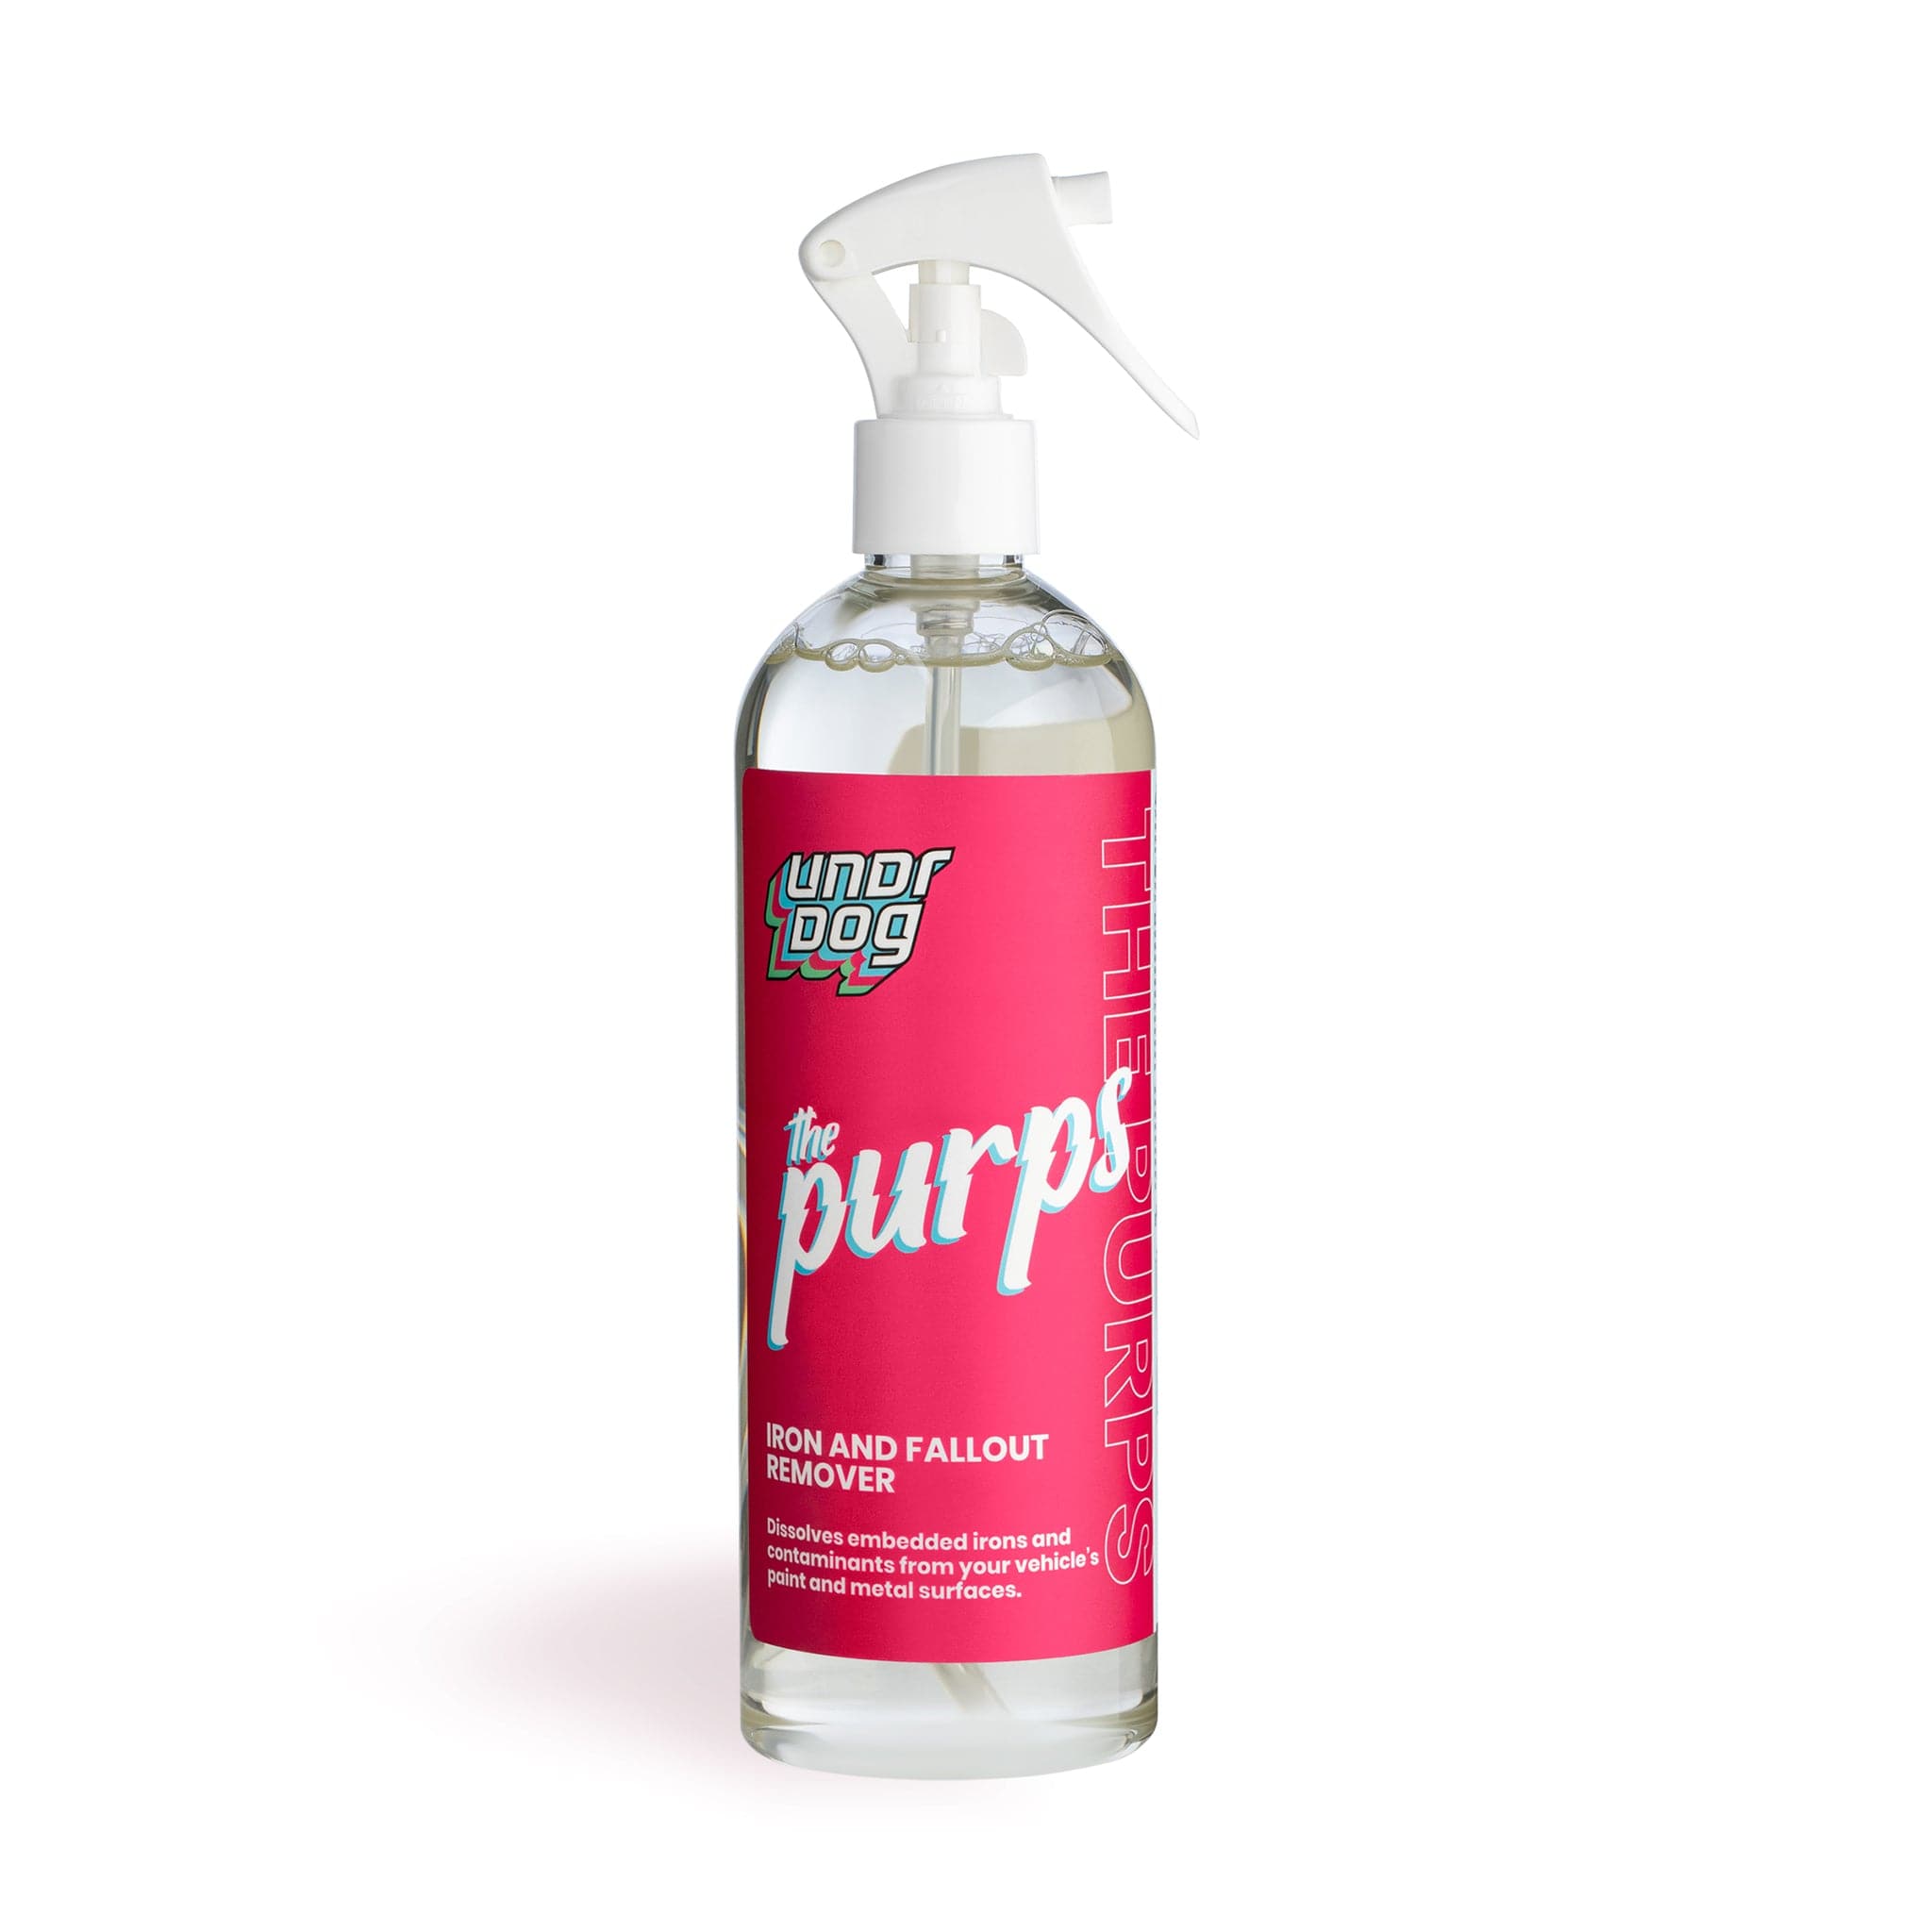 Purps_16oz.jpg - The Purps: Iron & Rust Remover - Undrdog Surface Products